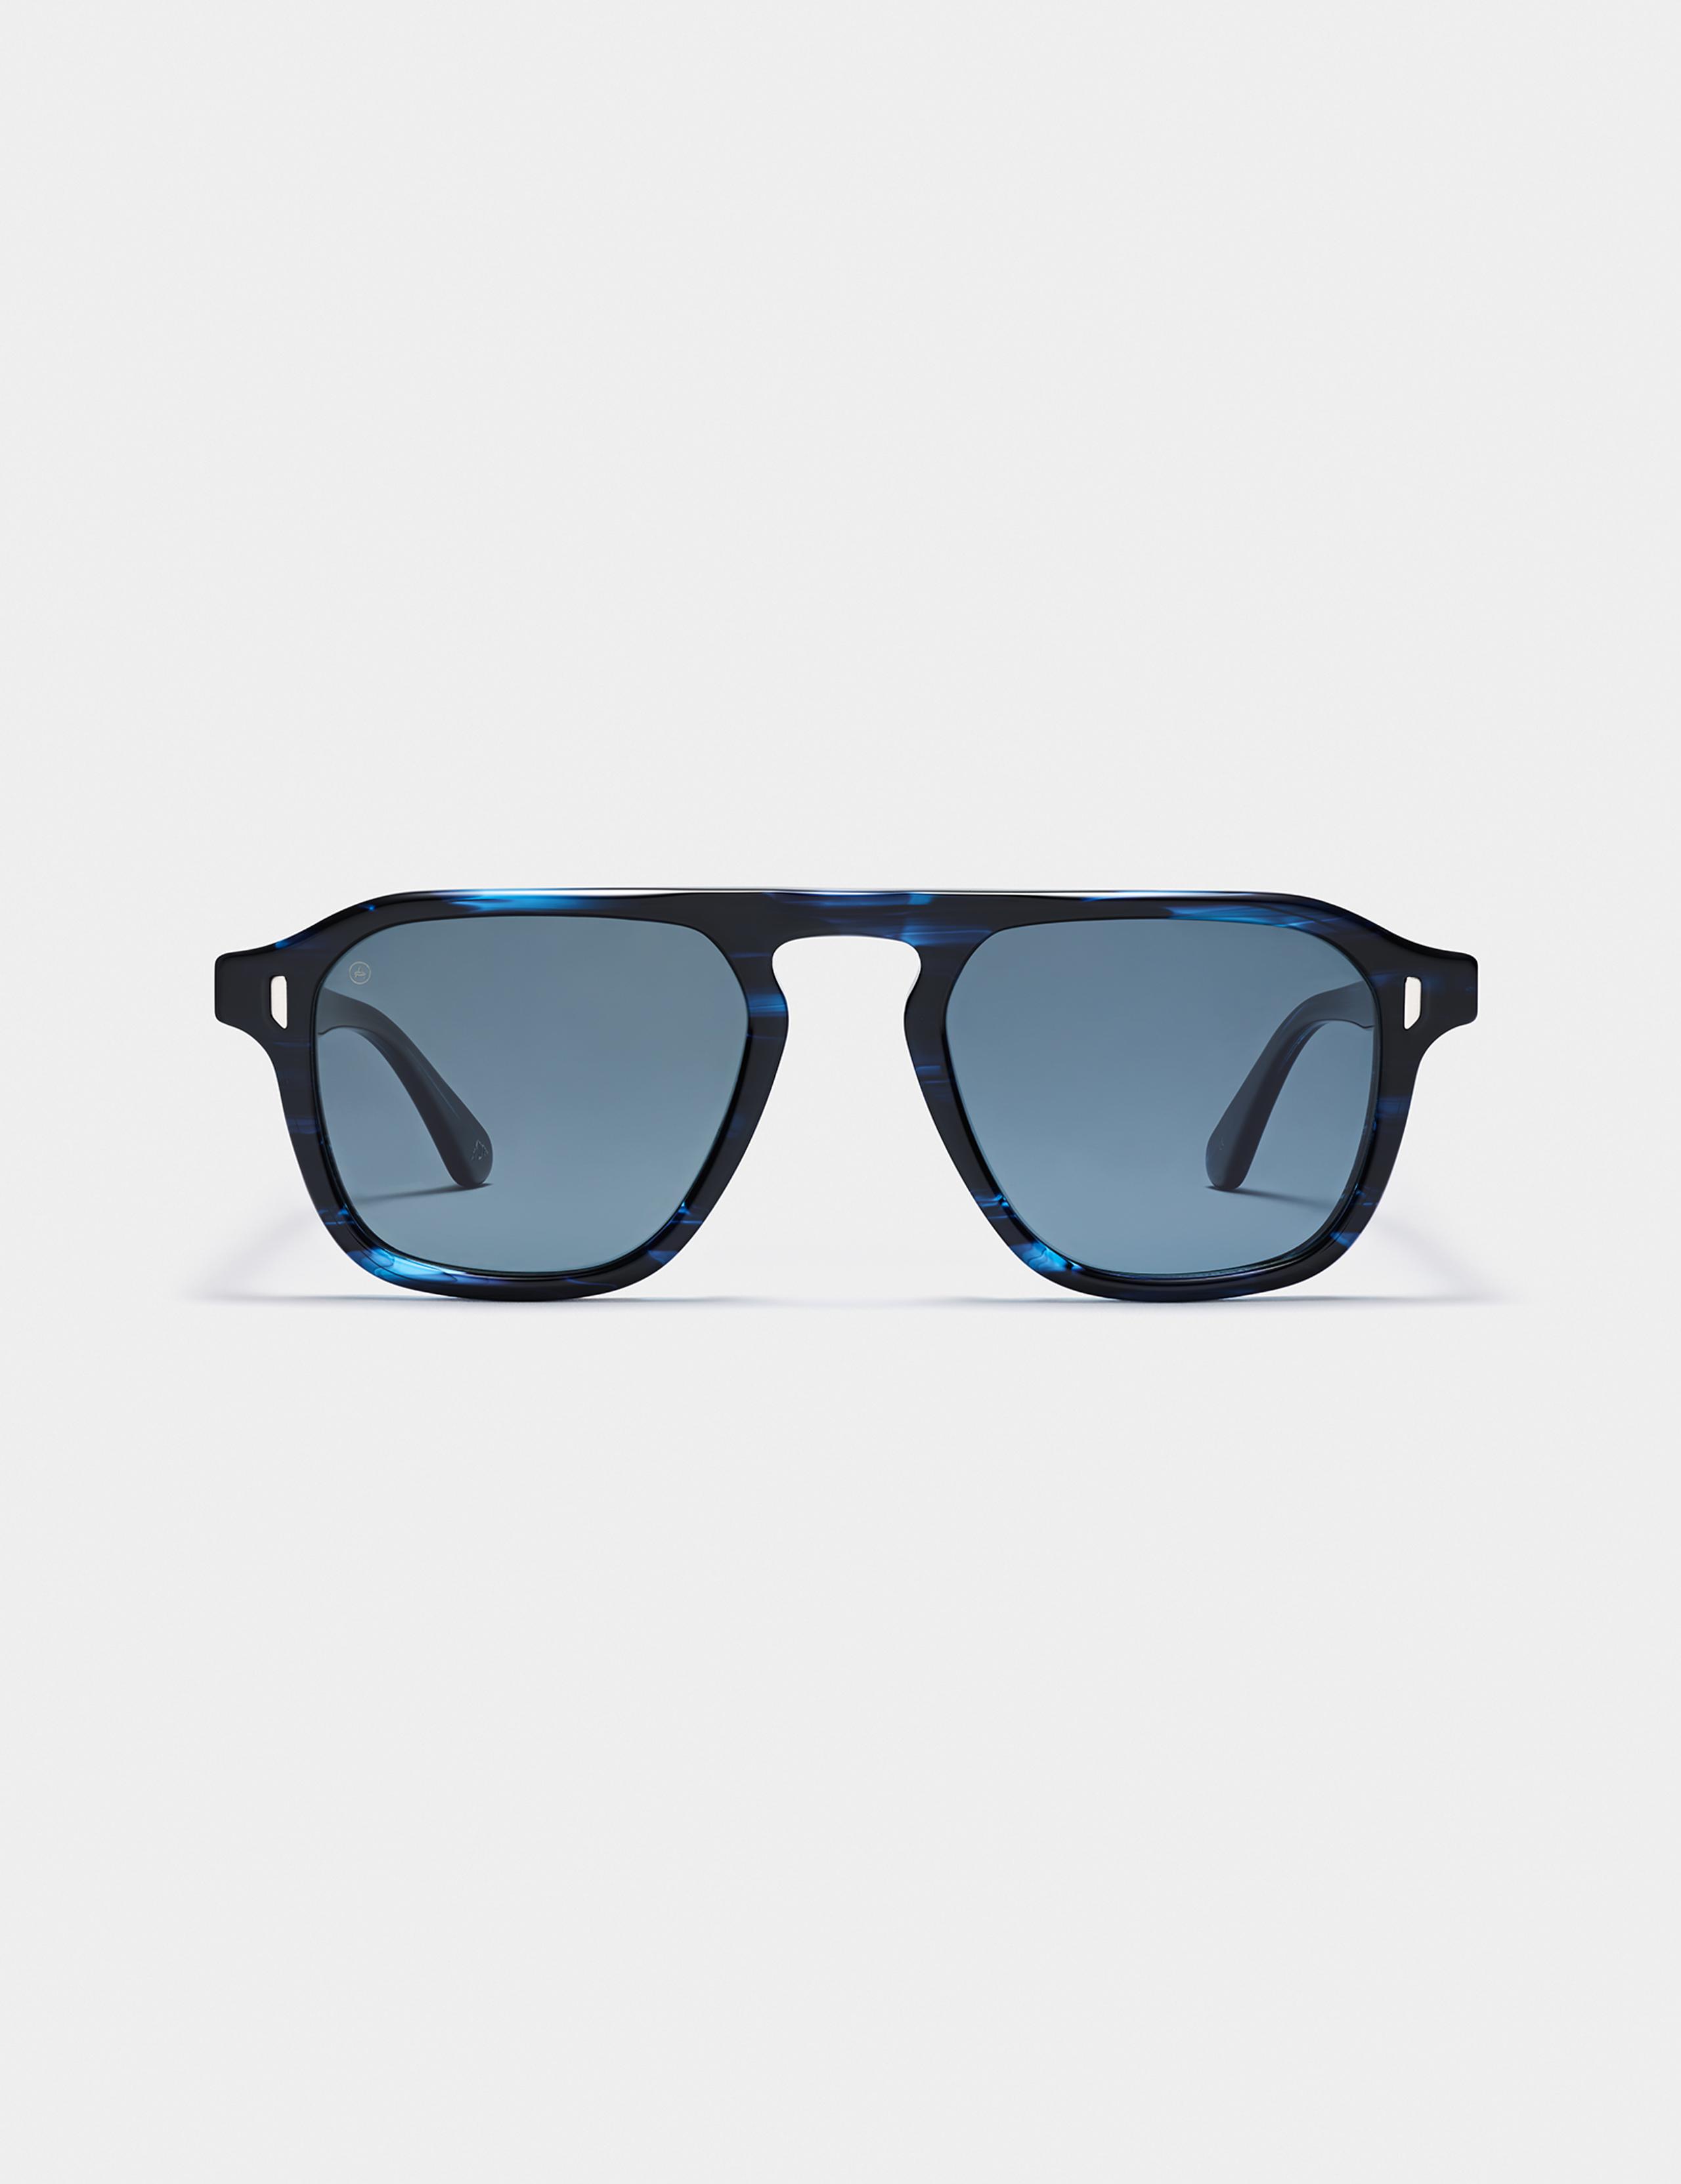 Studio front view of Sequoia in Blue Tortoise with Blue polarized lens